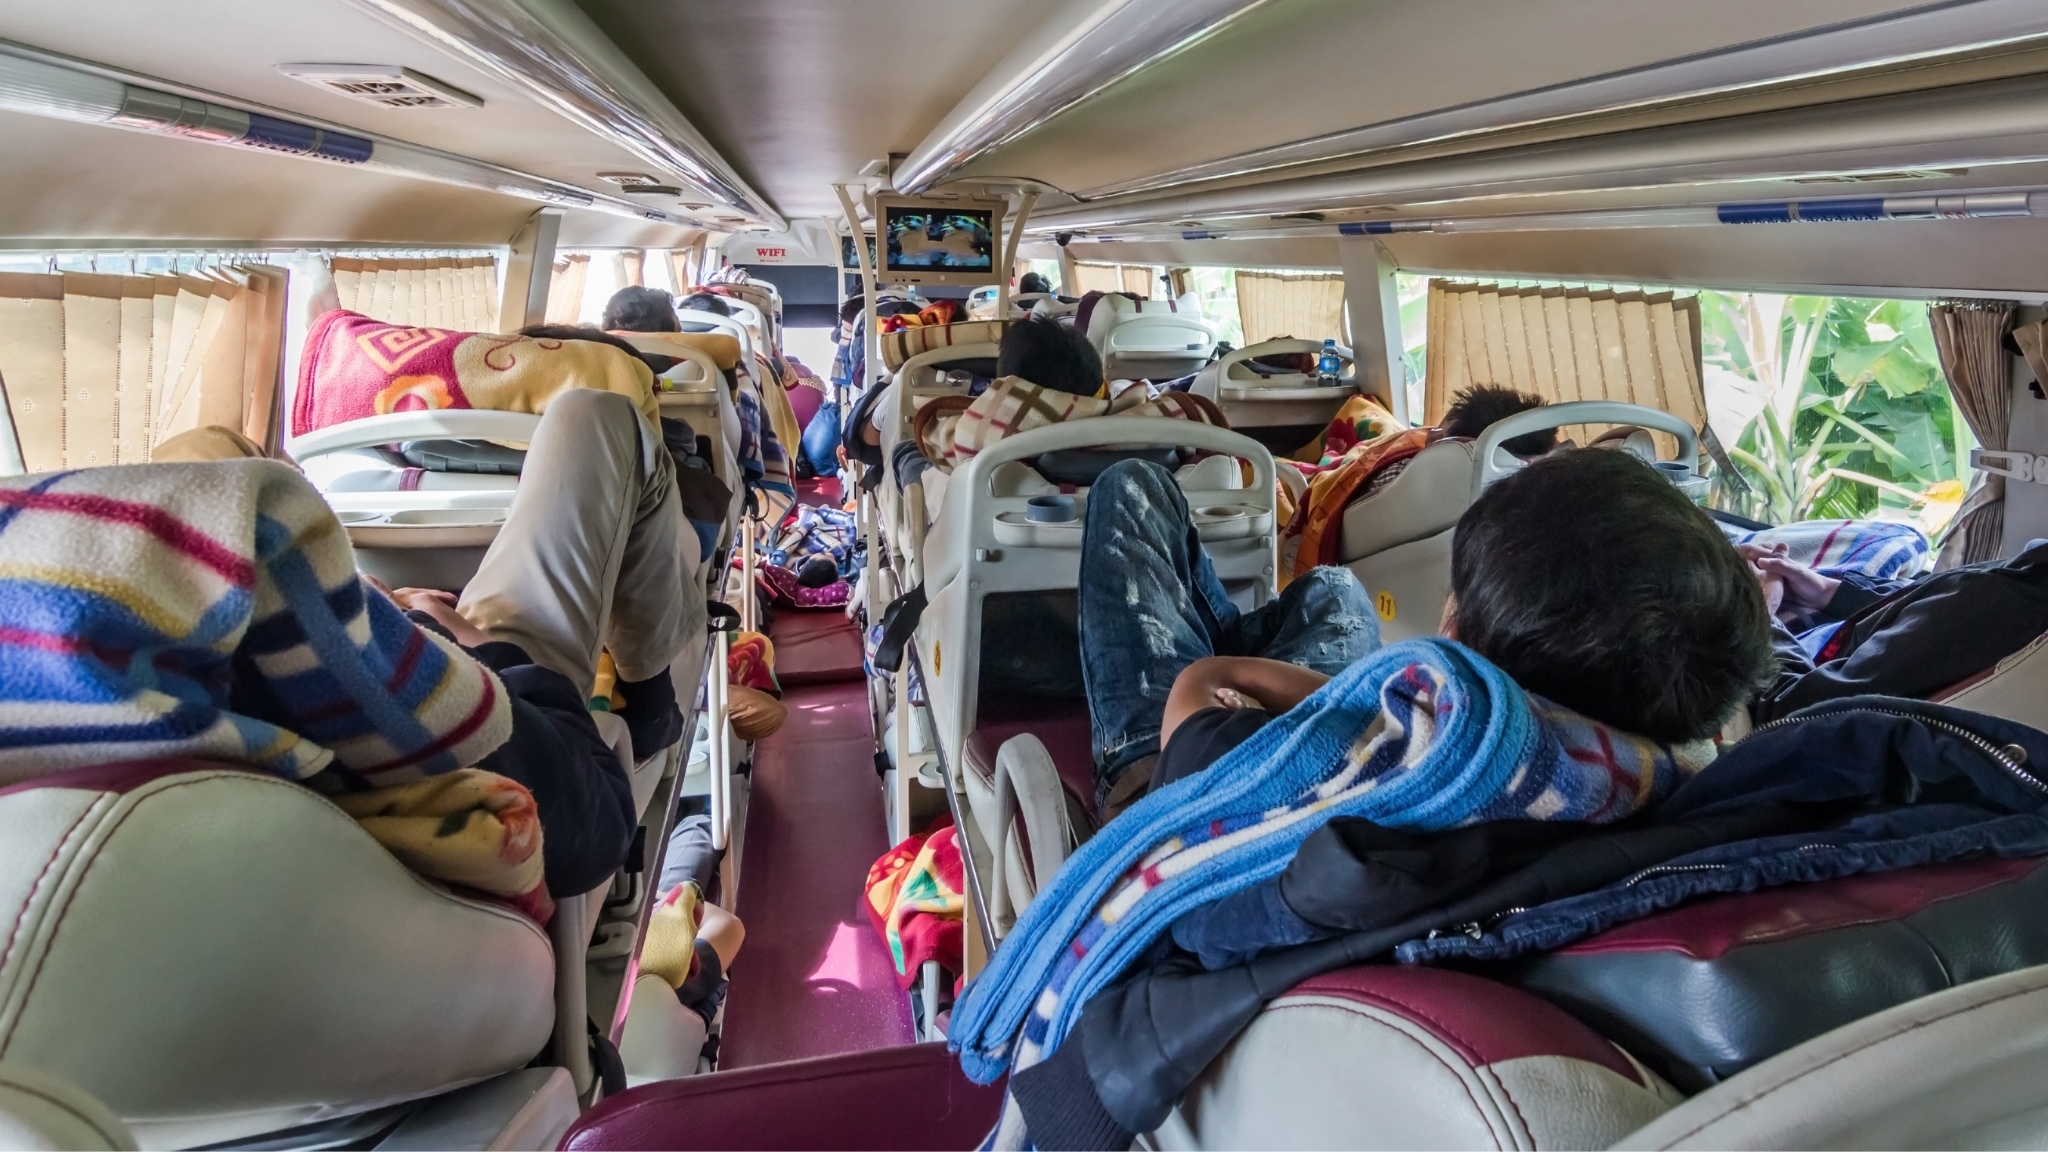 Most Halong Public Buses Are Sleeper Buses Suitable For Night Journeys